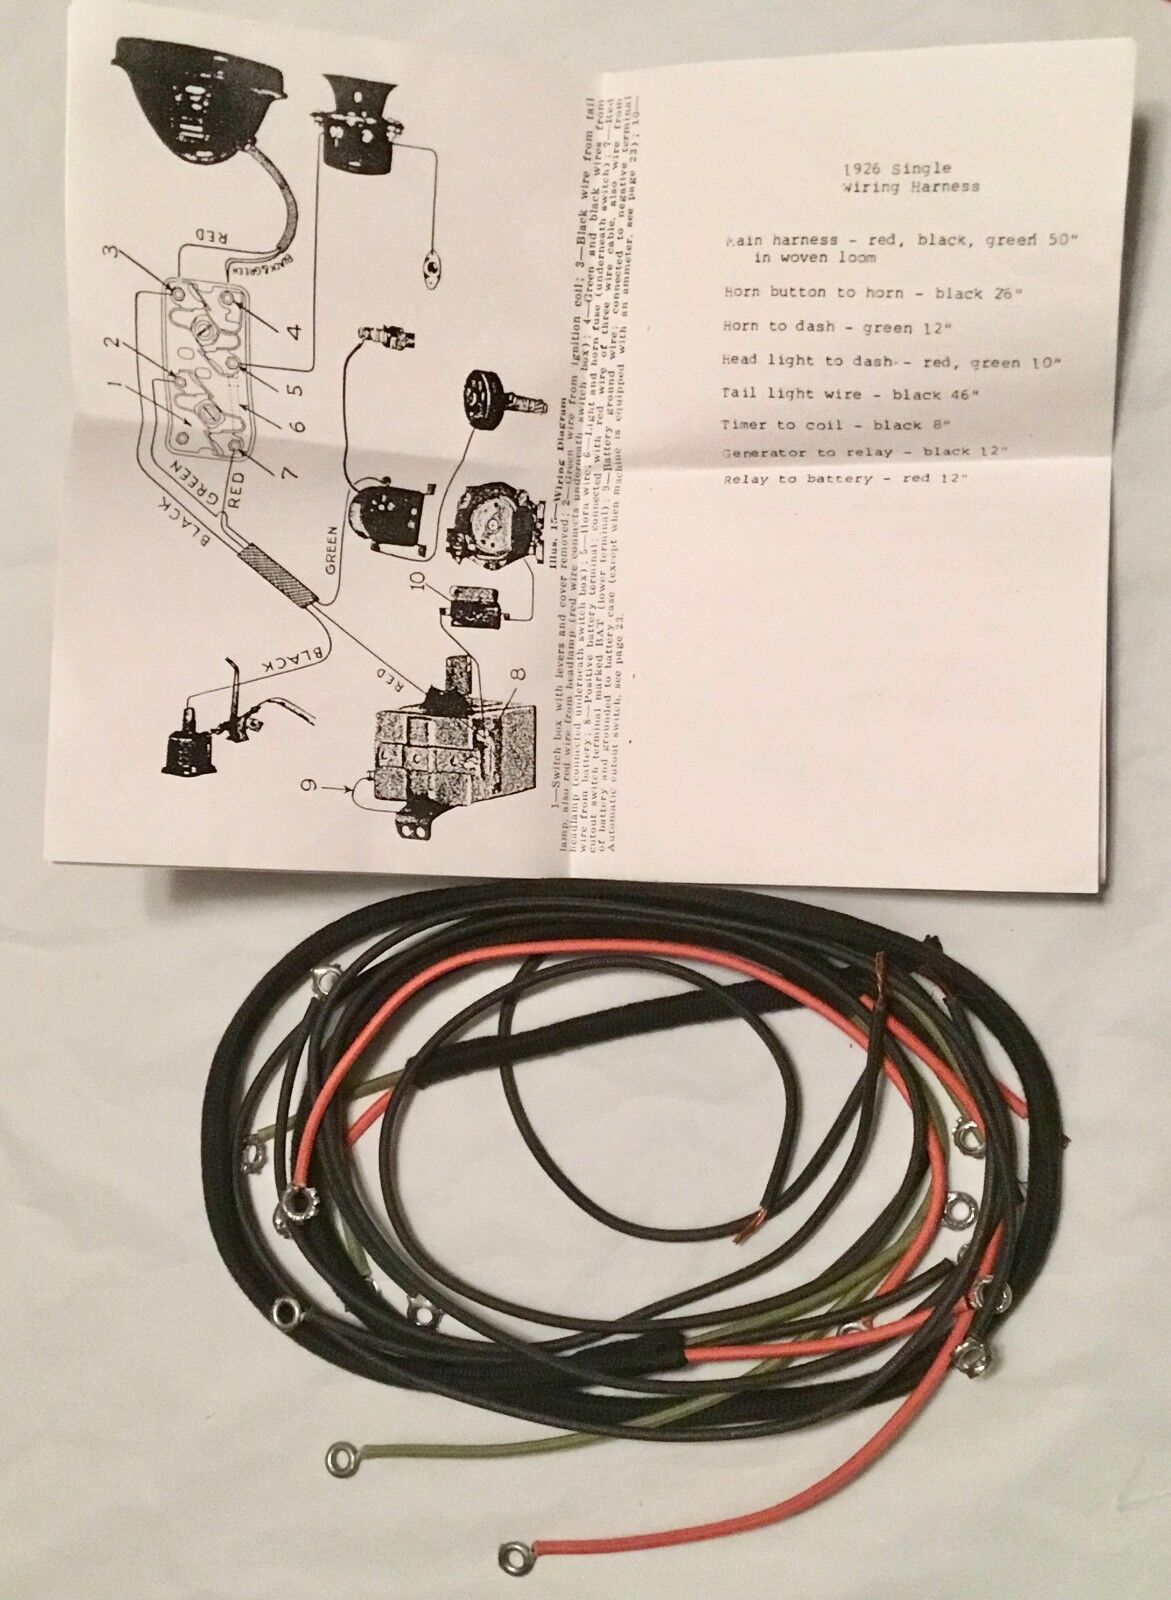 harley fxr jiffy stand instructions